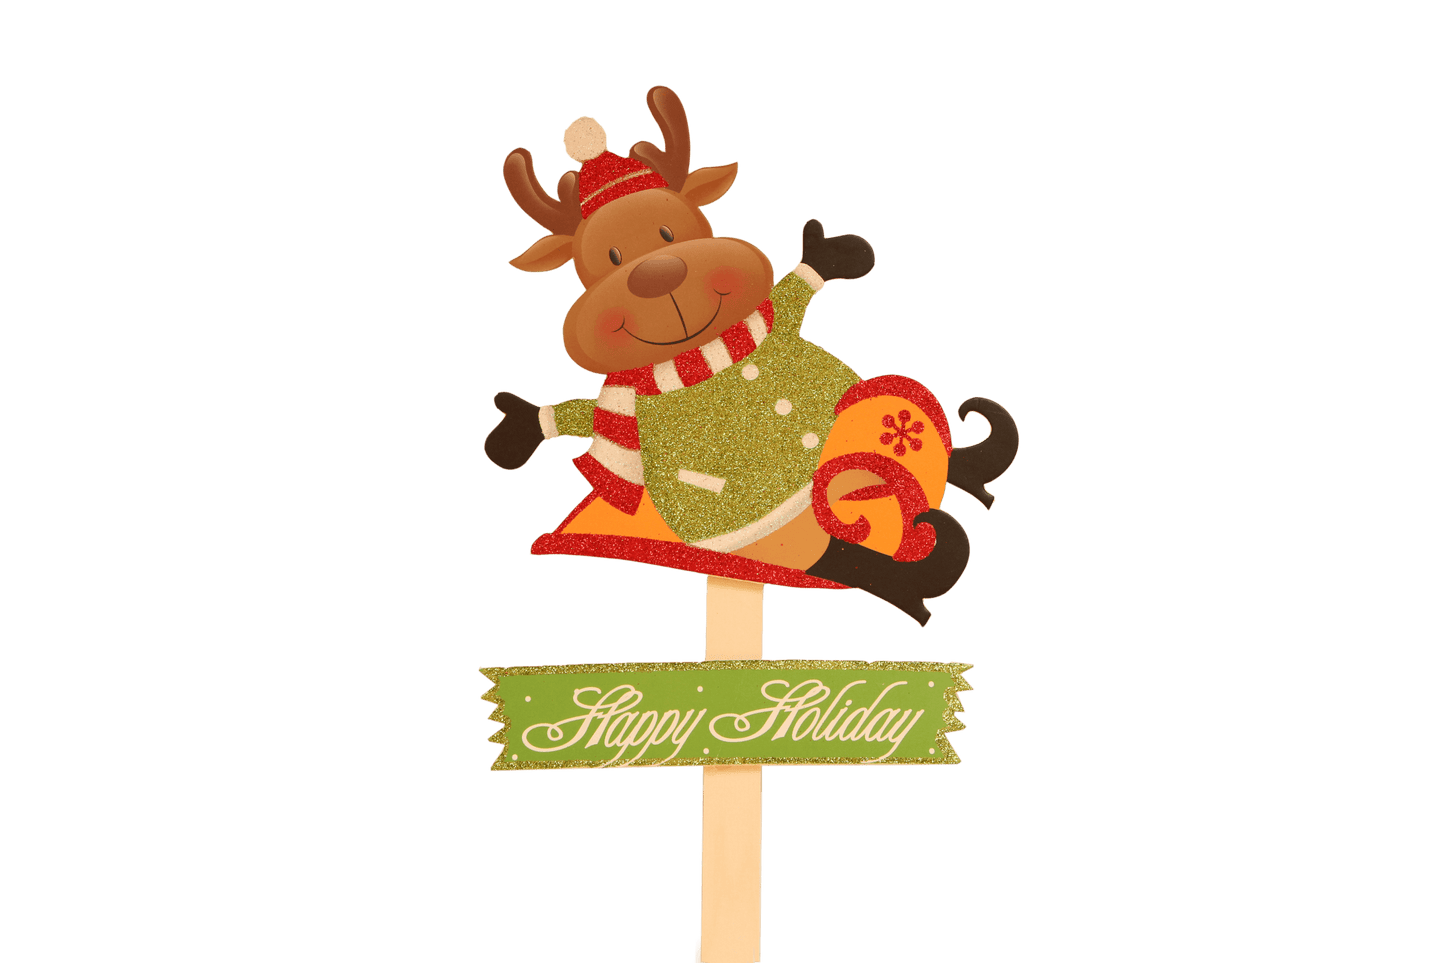 Christmas Reindeer with Sled "Happy Holiday" Pick